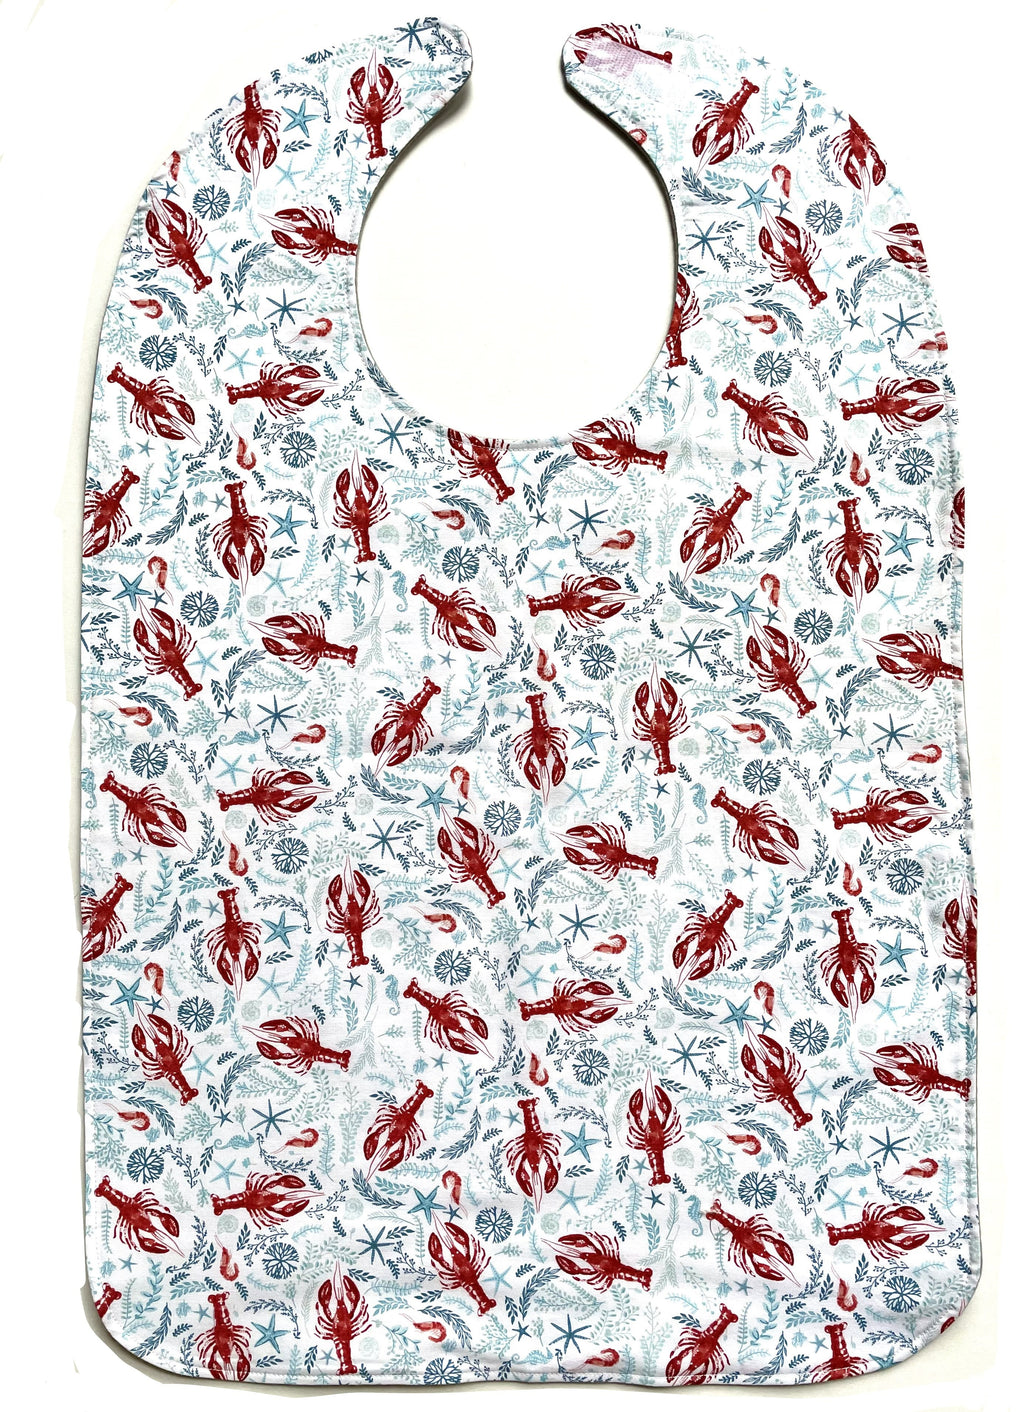 BAVETTE adult bib with red lobster design, and three layers of machine washable premium cotton, Velcro back closure, 26" x 17" 